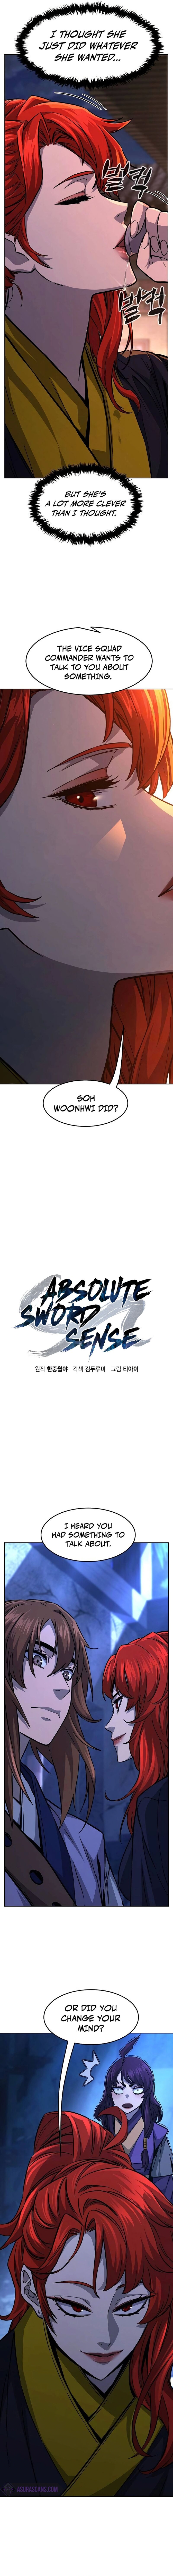 Absolute Sword Sense Chapter 80 Page 6